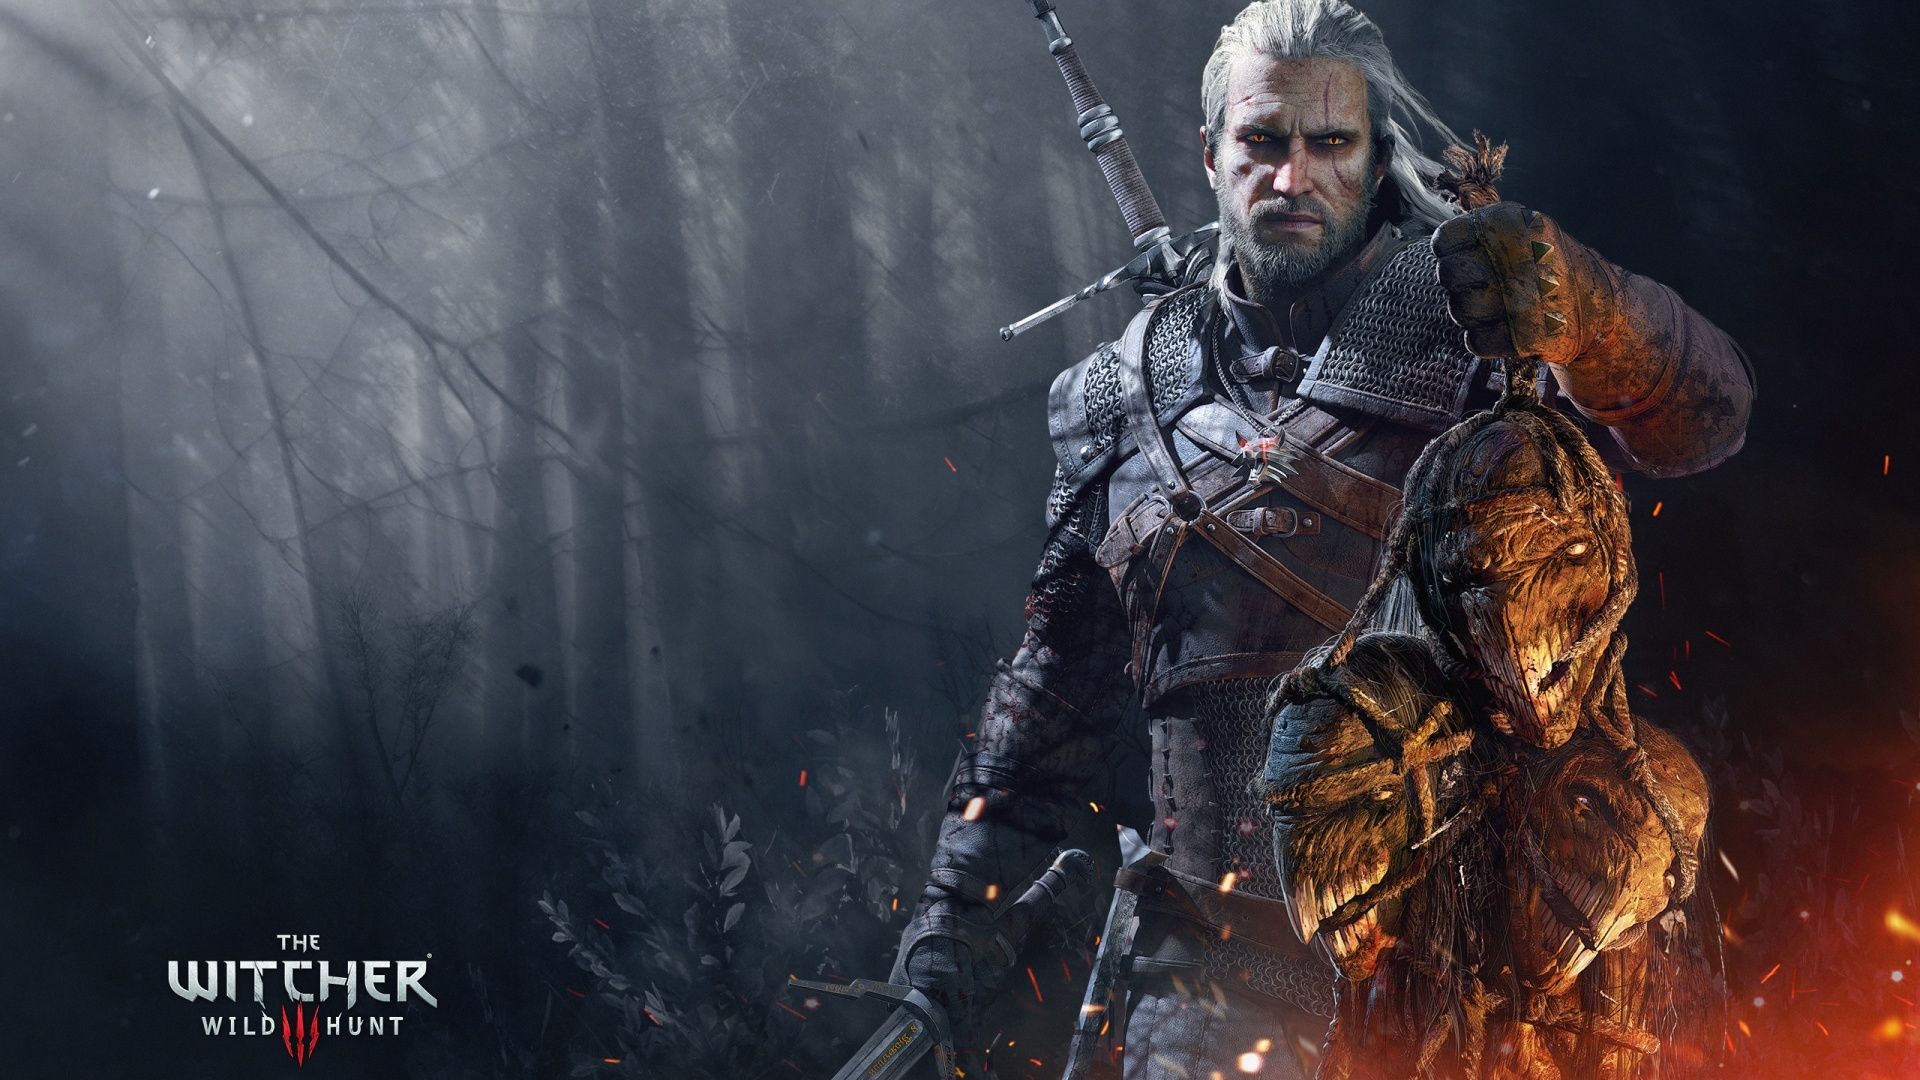 The Witcher Desktop Wallpapers with high-resolution 1920x1080 pixel. You can use this poster wallpaper for your Desktop Computers, Mac Screensavers, Windows Backgrounds, iPhone Wallpapers, Tablet or Android Lock screen and another Mobile device